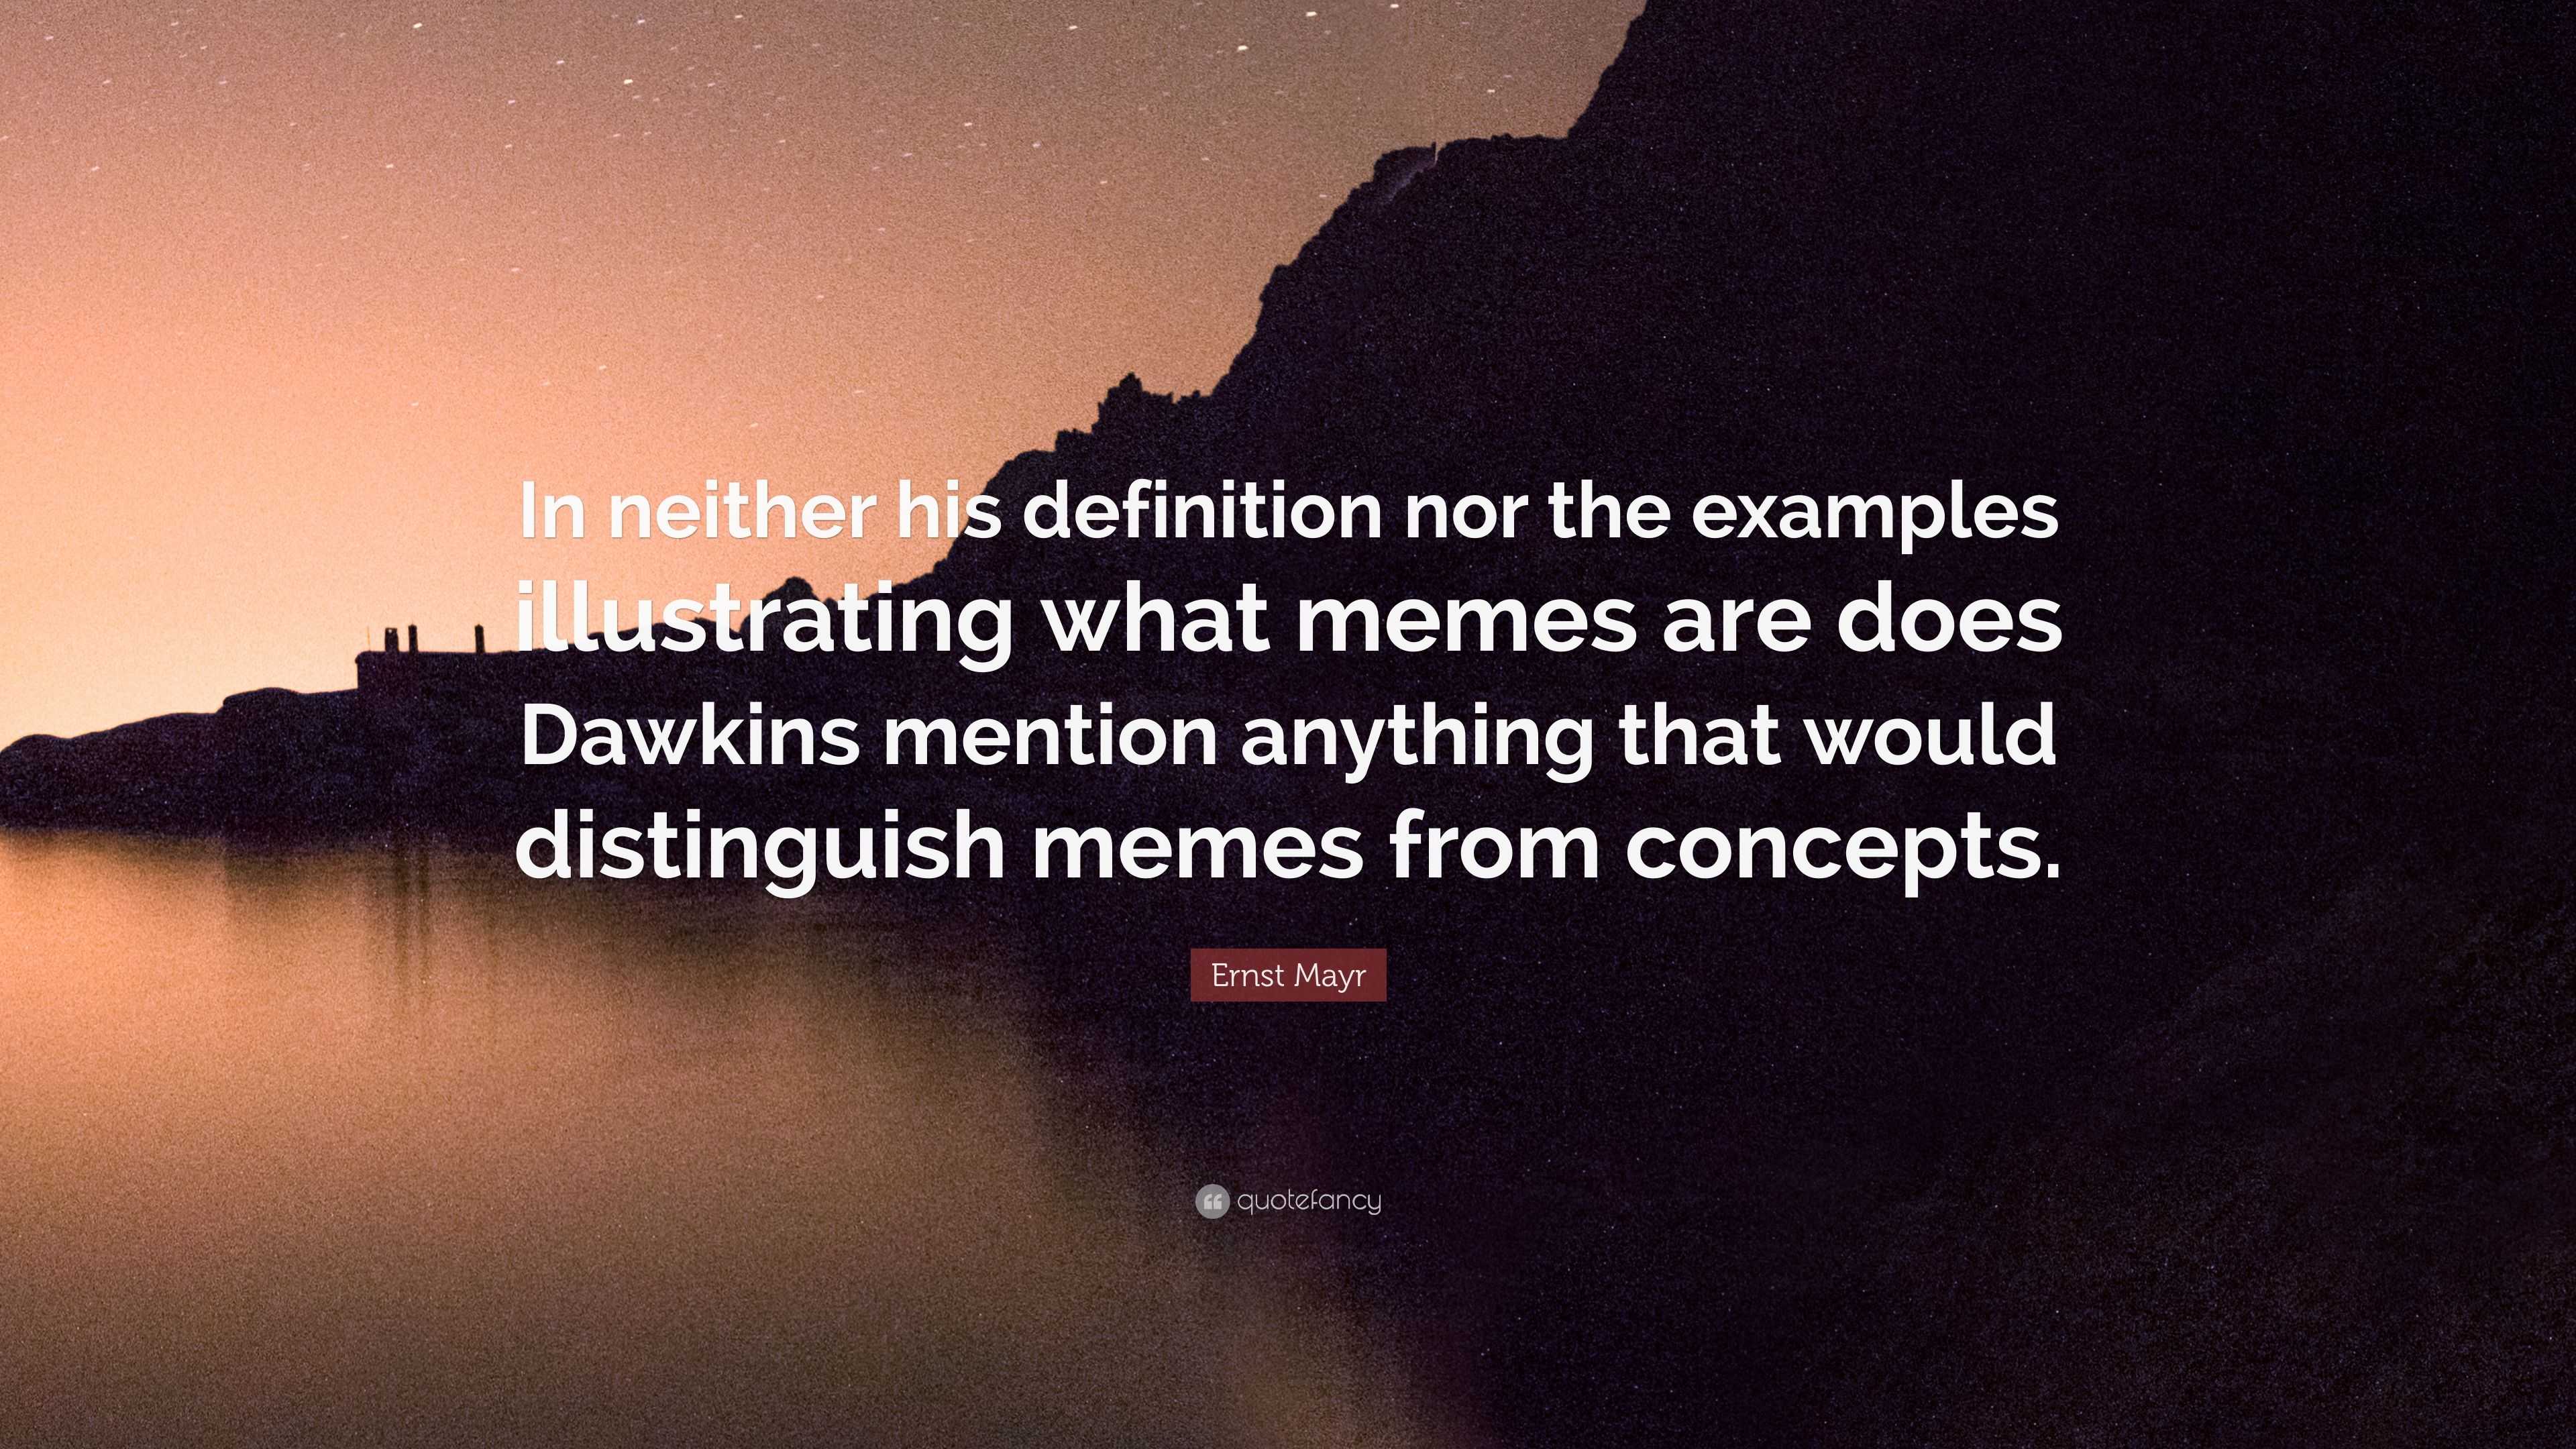 What Is a Meme? Definition and Examples